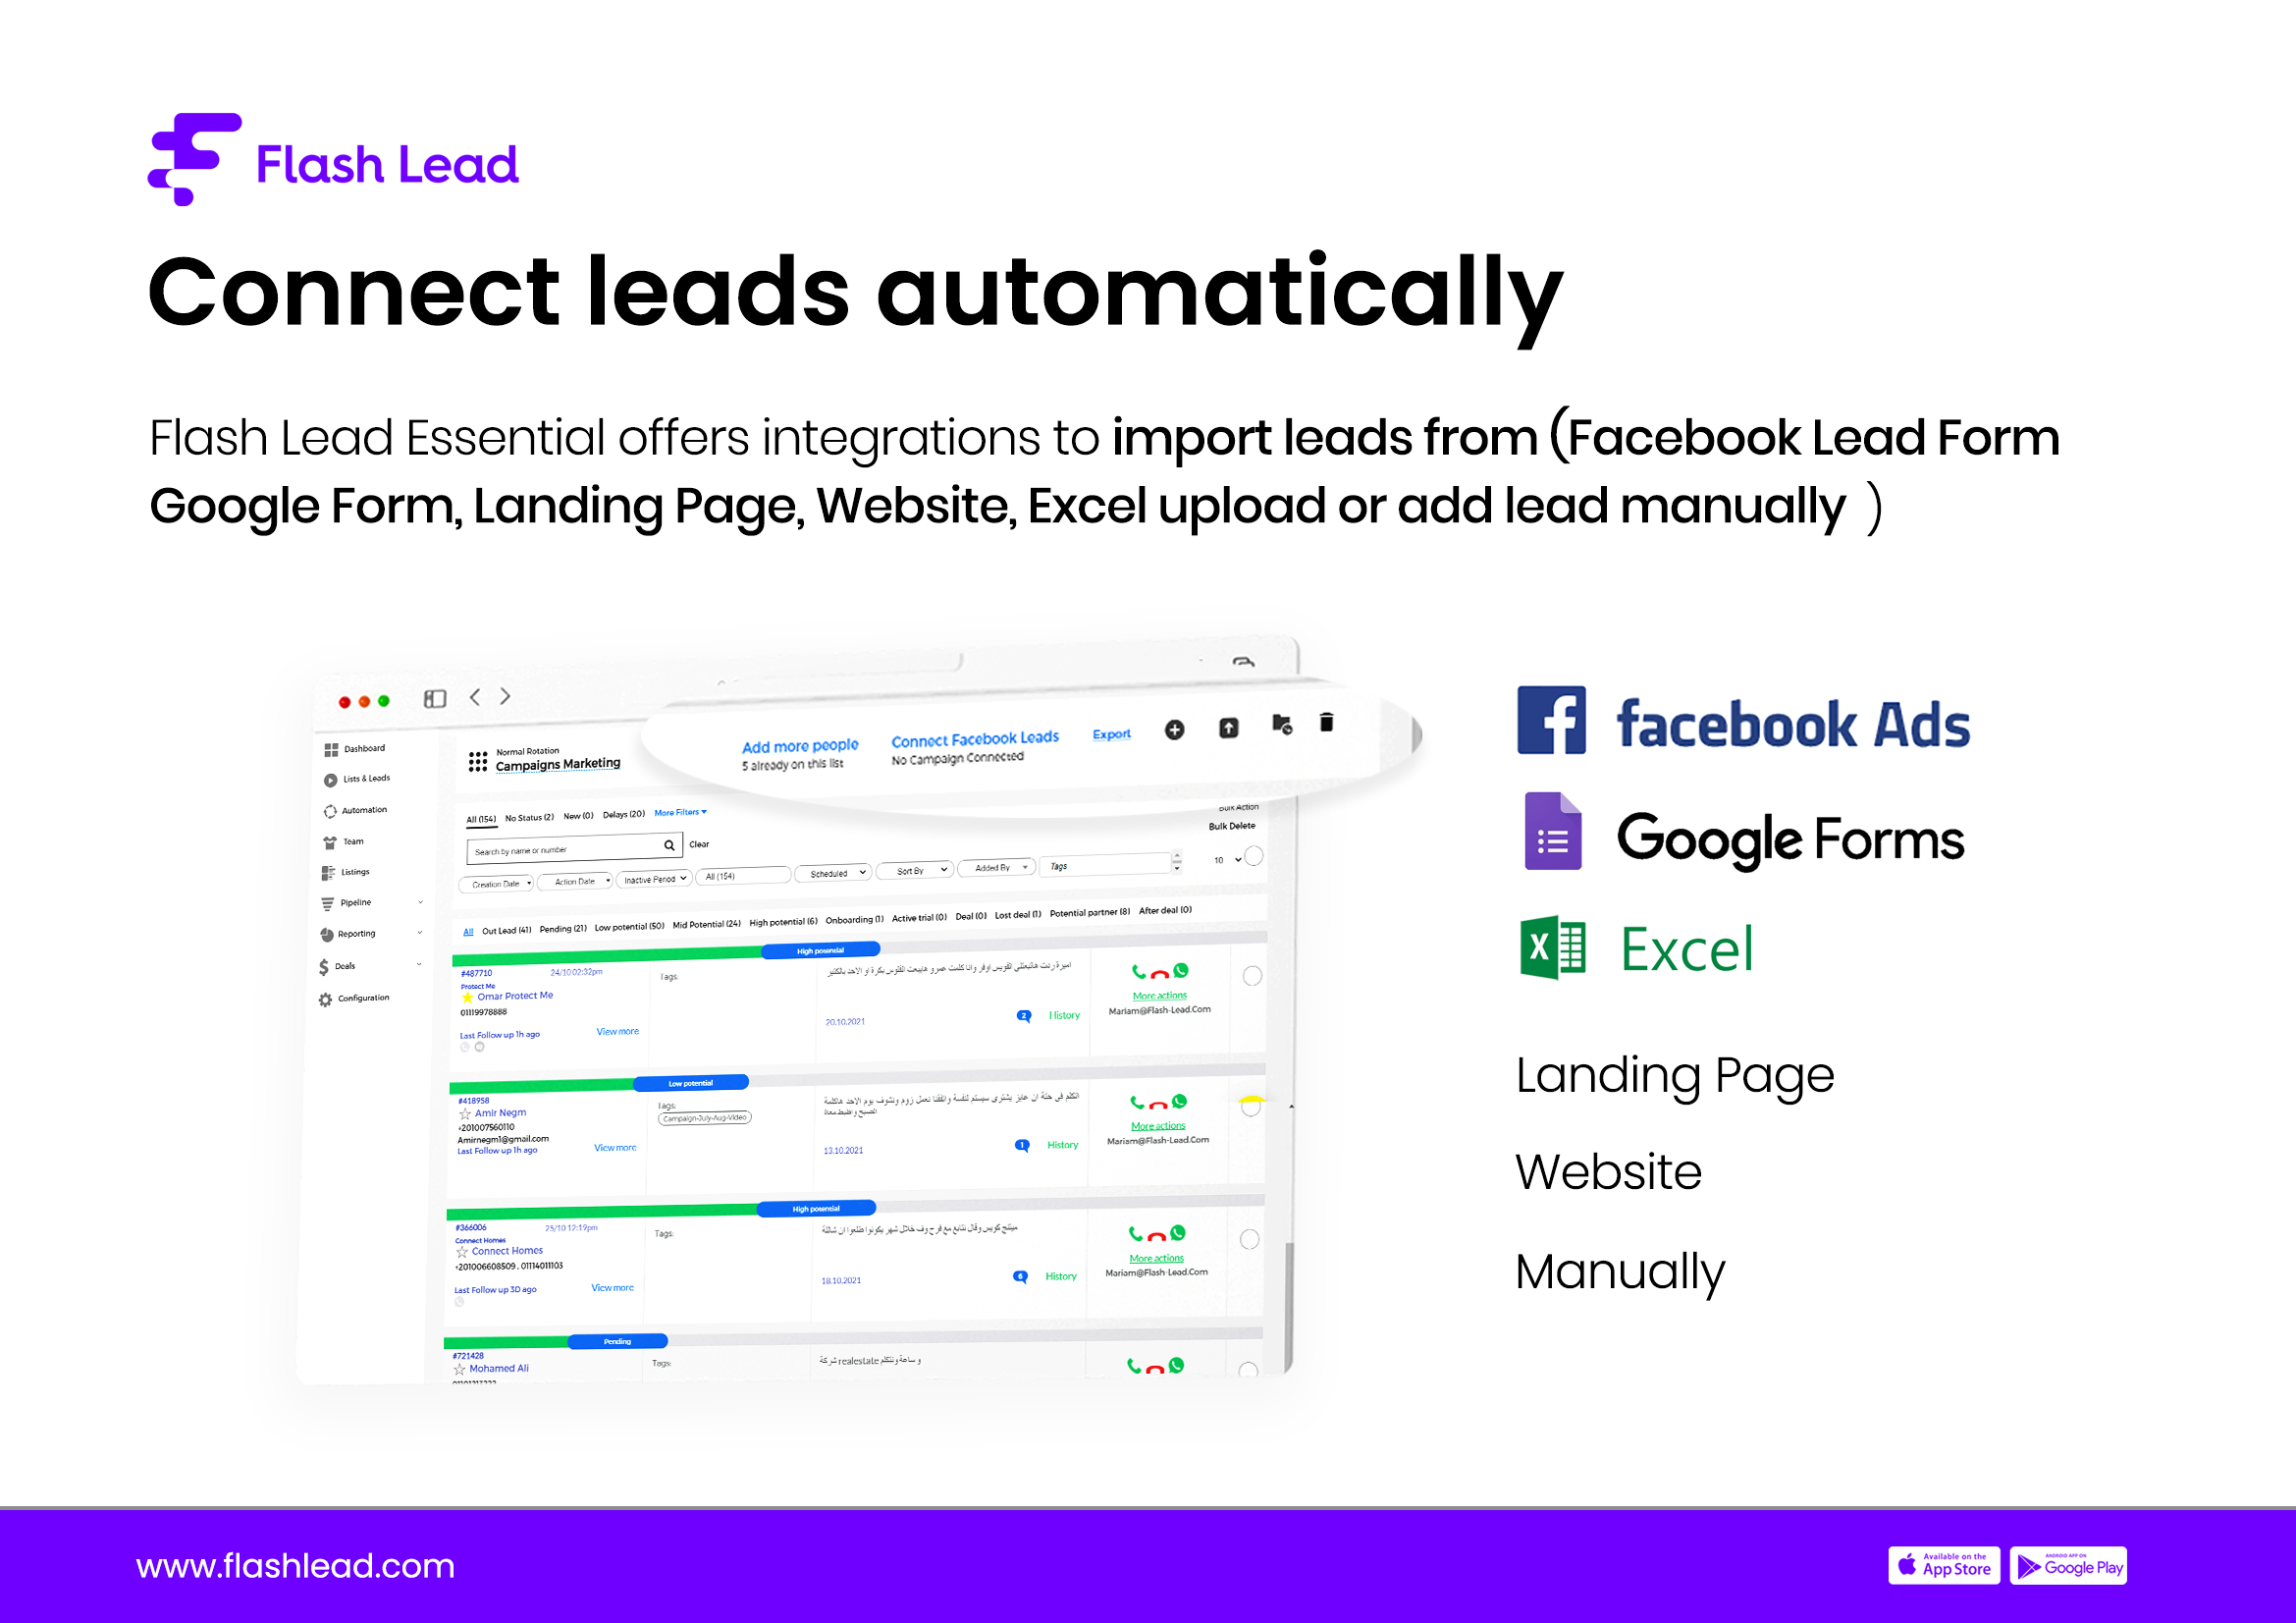 Connect your leads from all sources with the click of a button.